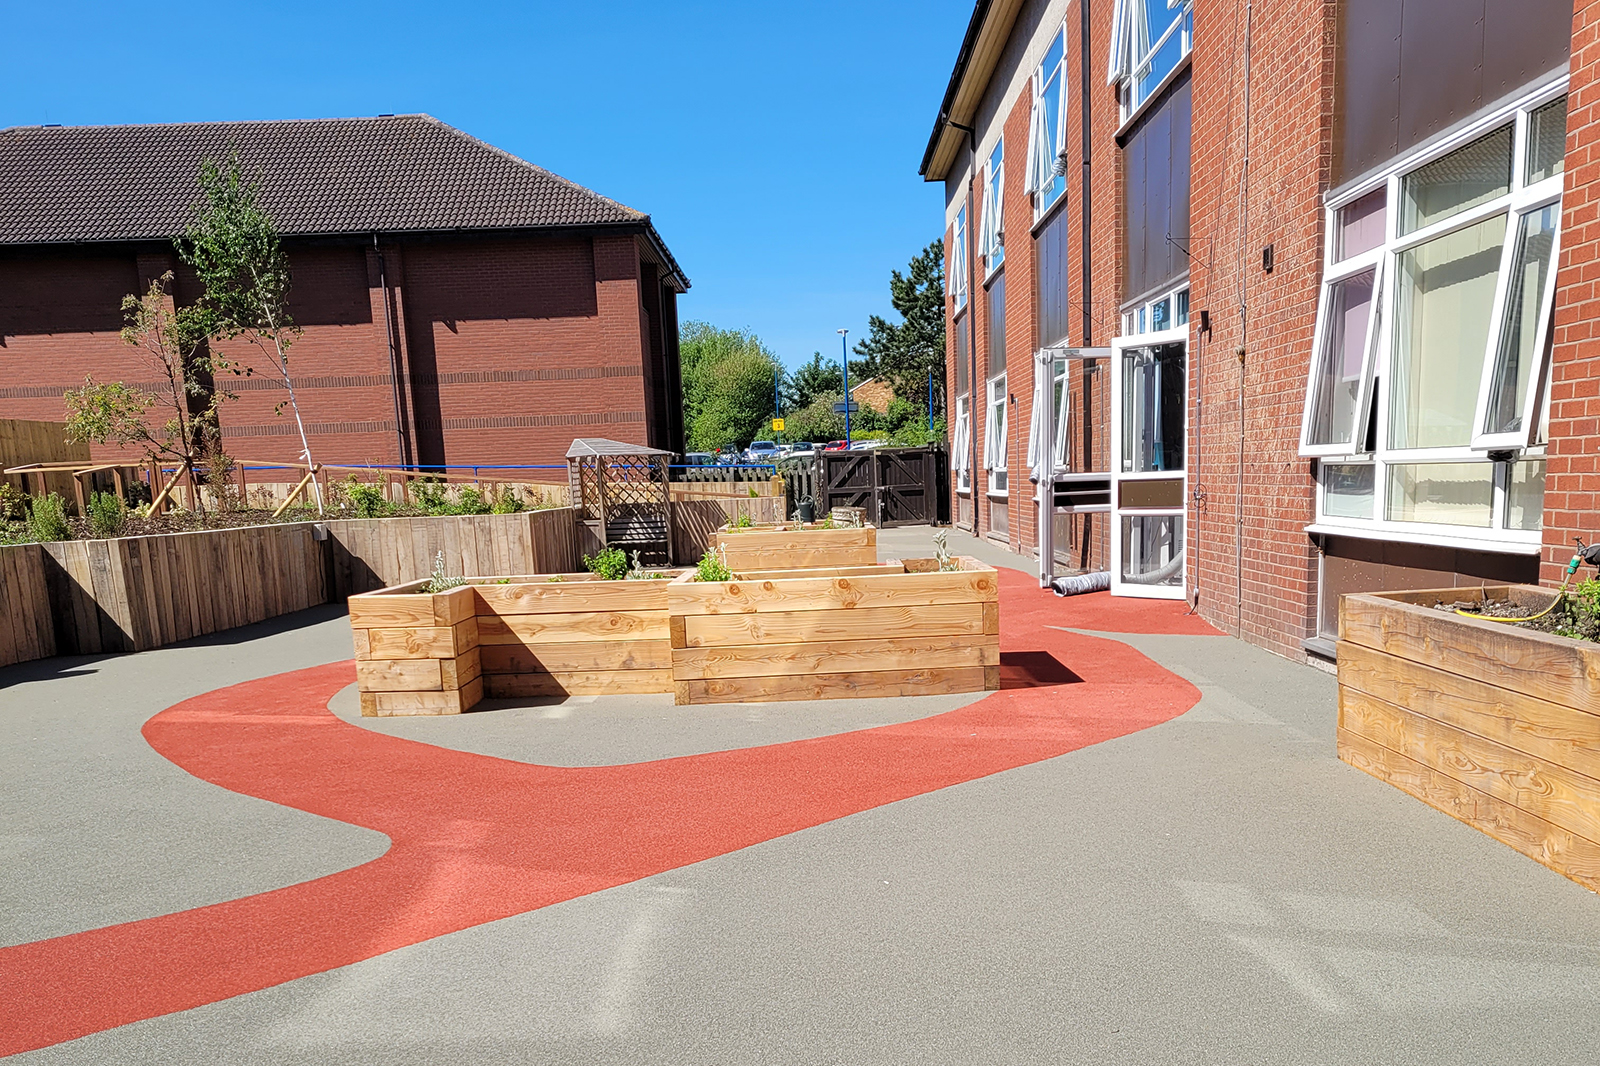 Hospital garden project unveiled following donation from Triton Showers